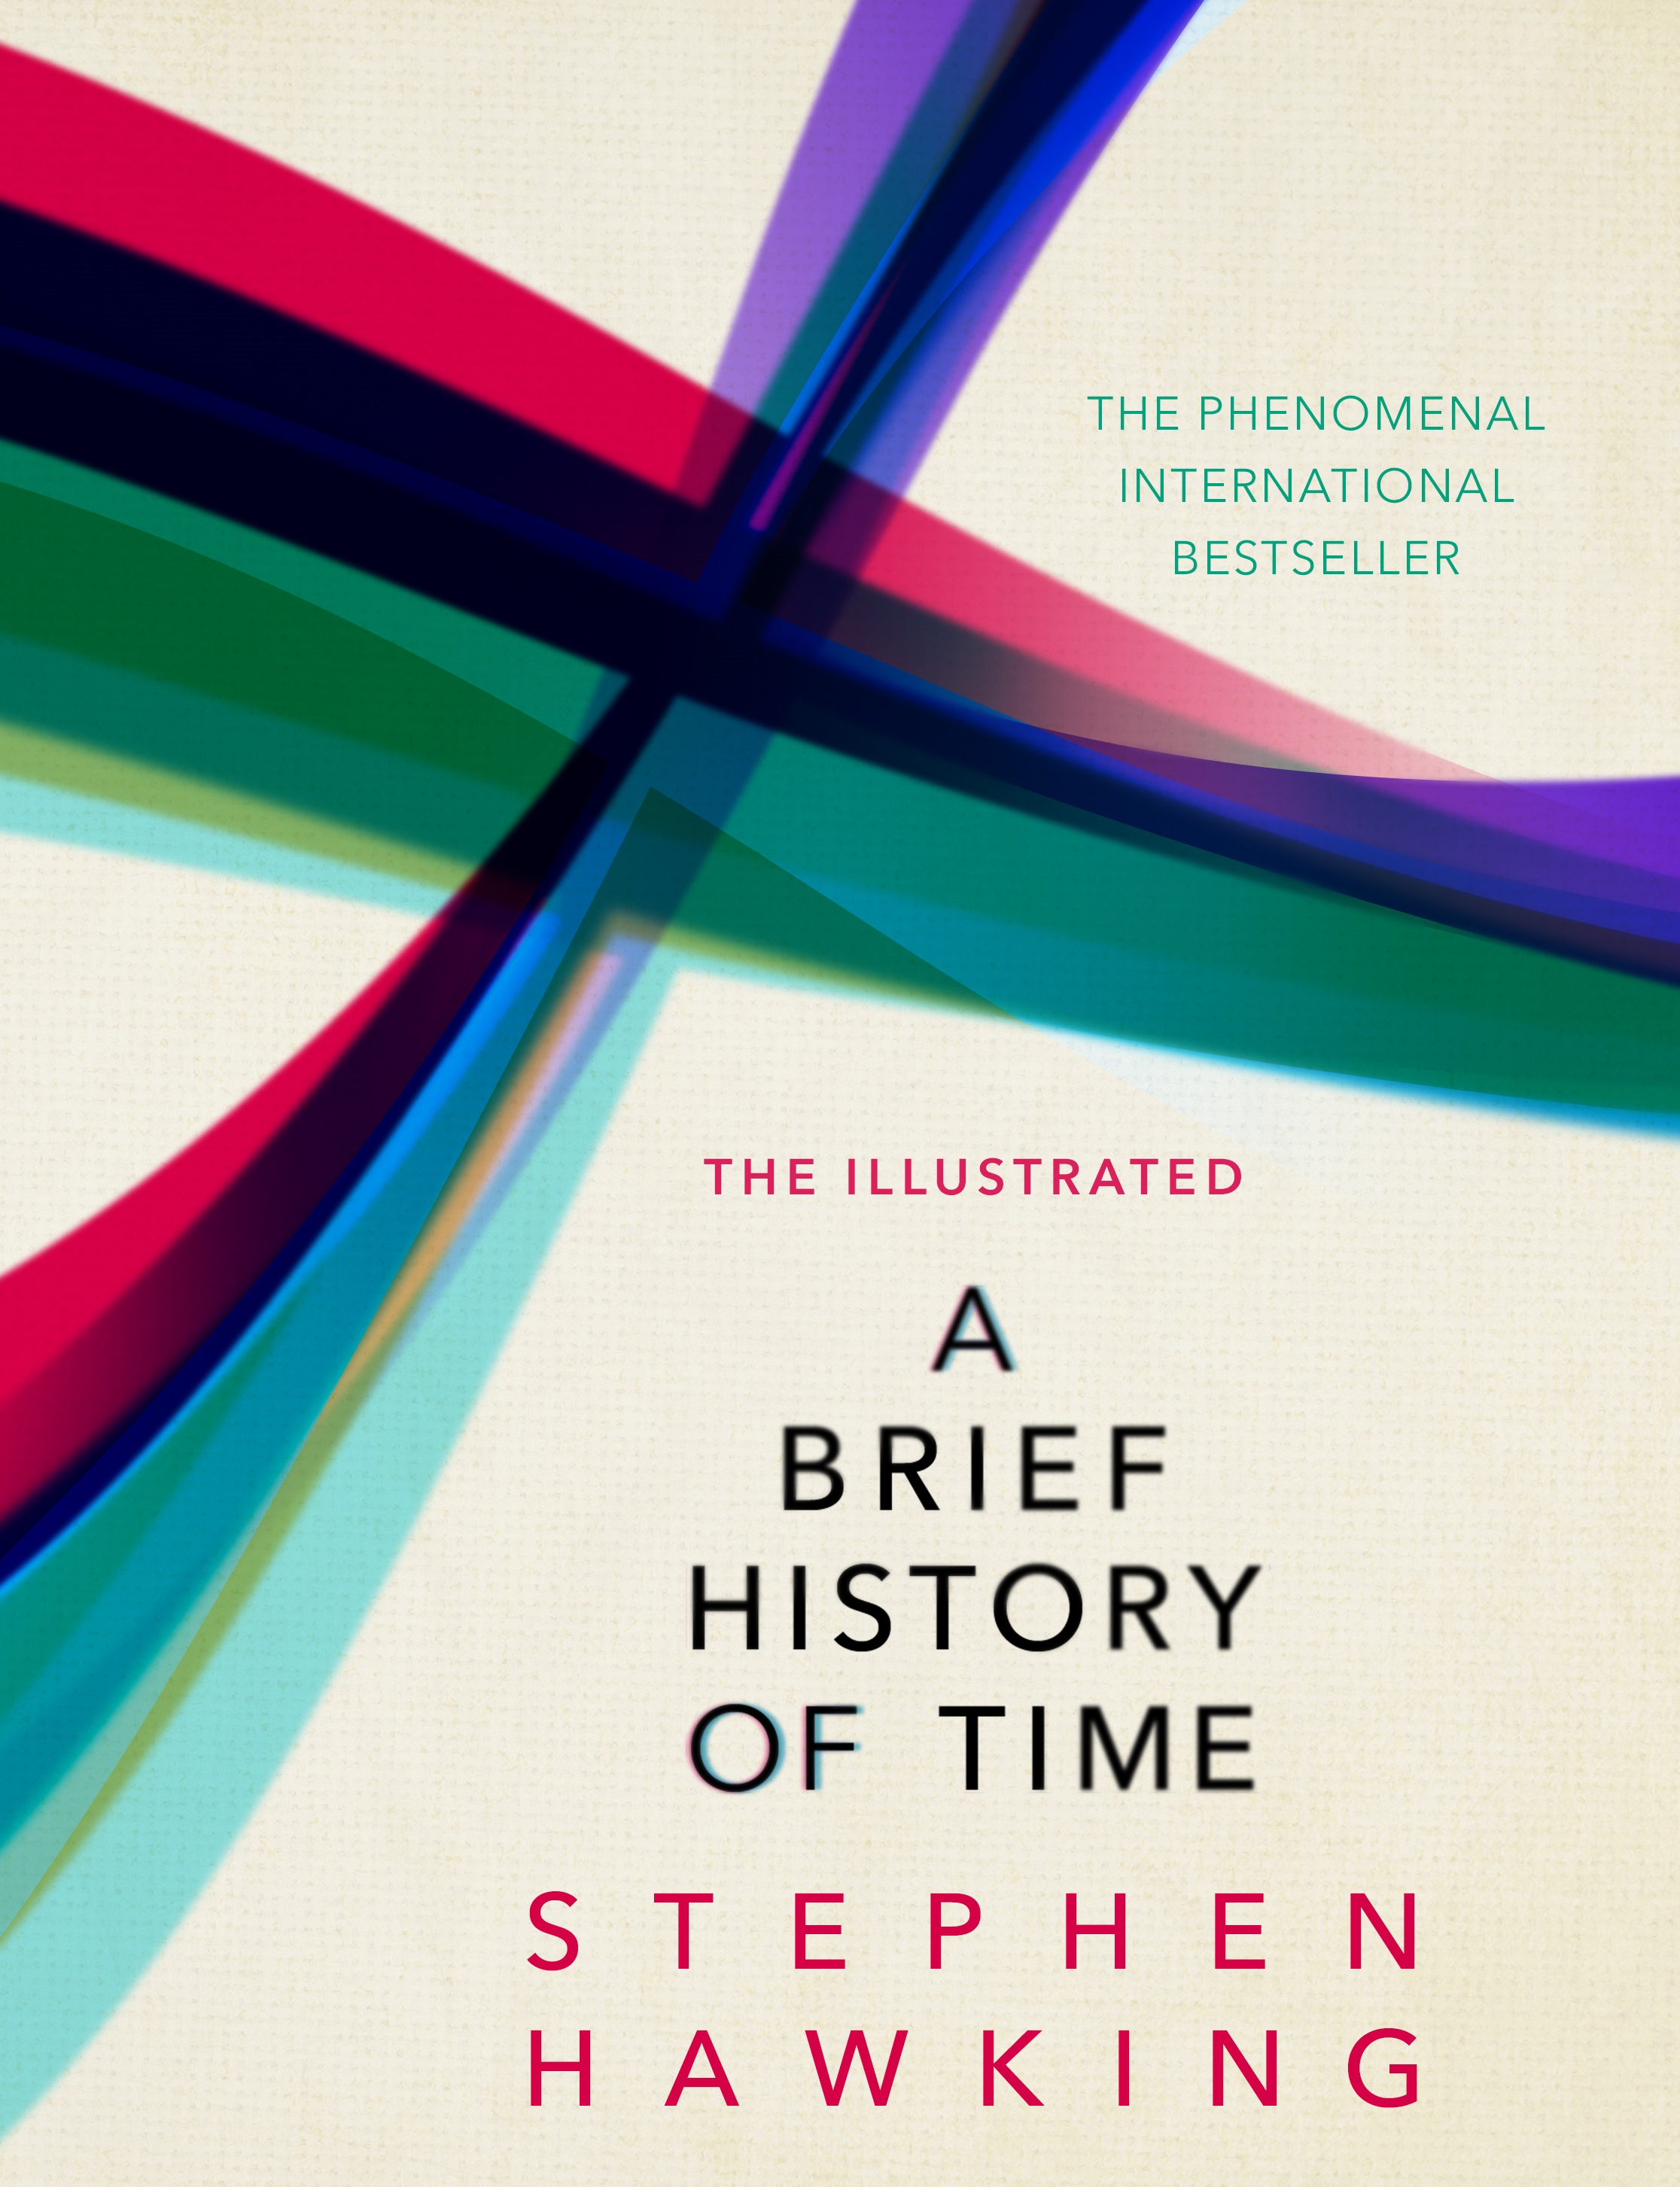 The Illustrated Brief History Of Time by Stephen Hawking - Penguin Books Australia